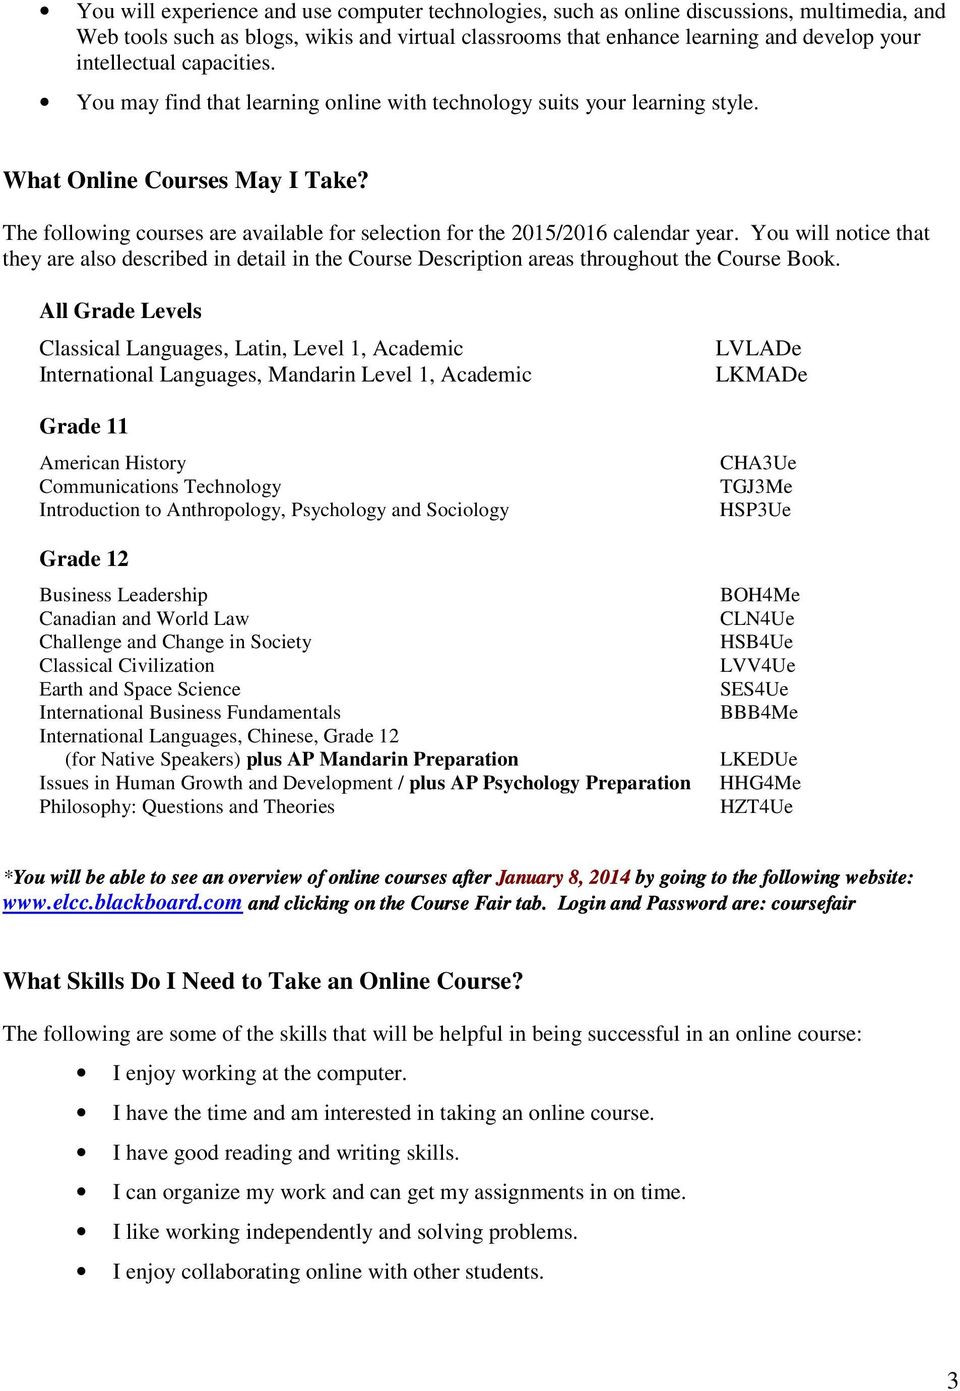 The following courses are available for selection for the 2015/2016 calendar year. You will notice that they are also described in detail in the Course Description areas throughout the Course Book.